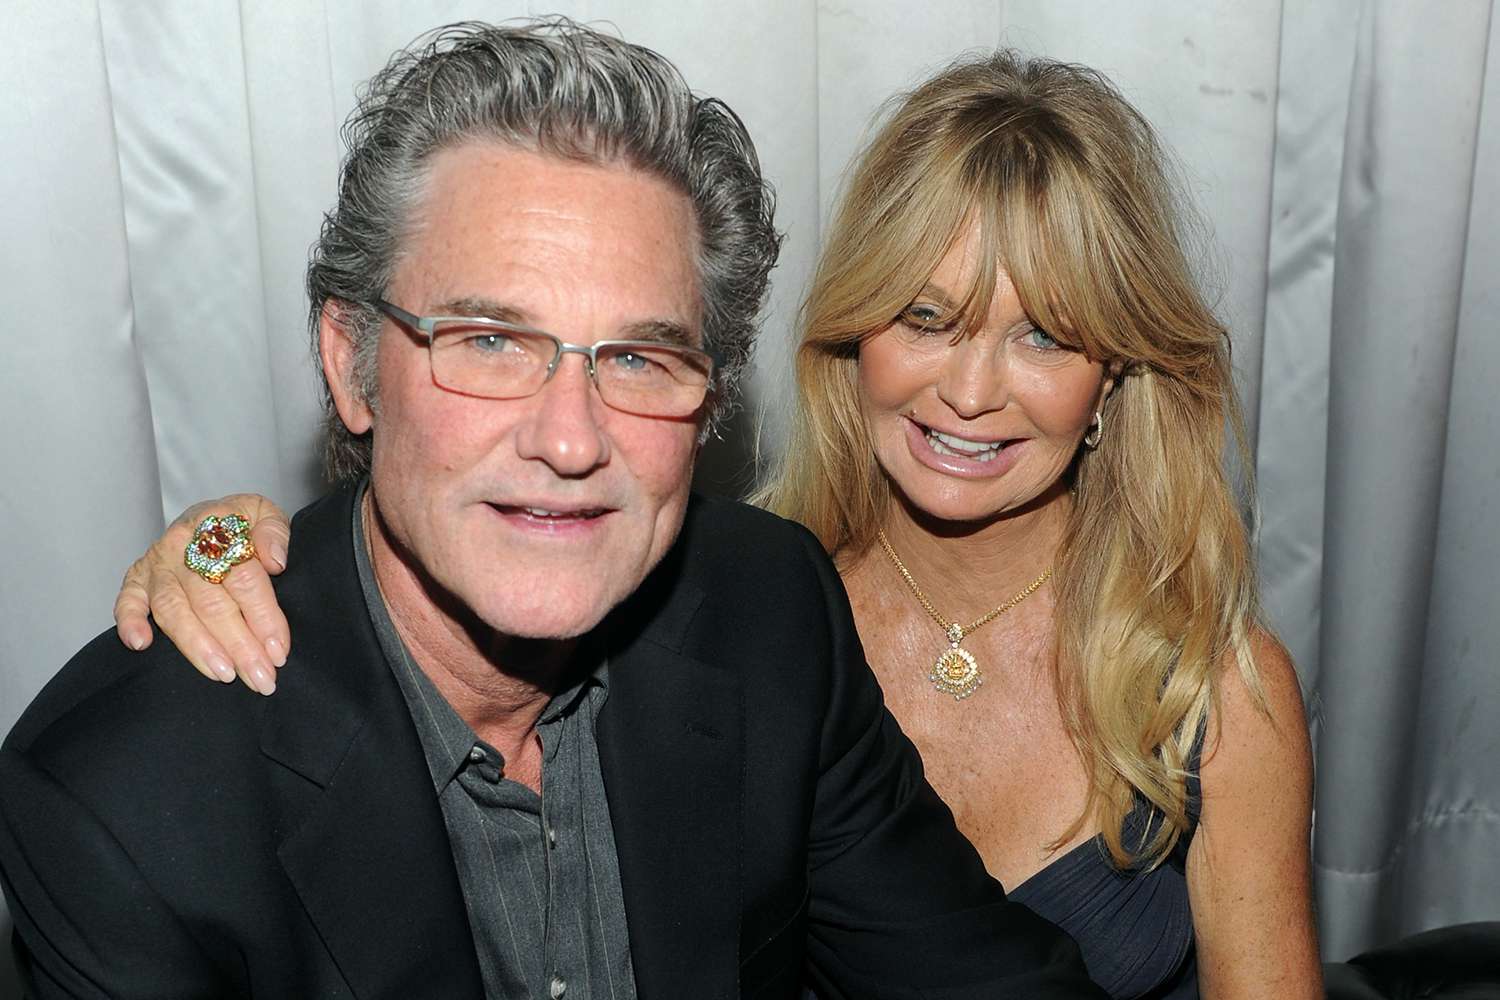 **Unbreakable Love: Goldie Hawn and Kurt Russell's Enduring Hollywood Romance | GoldieHawn | KurtRussell | HollywoodRomance | LongLastingLove | UnbreakableLove | LoveStory | CelebrityCouples | RelationshipGoals | TrueLove | EnduringPartnership | HollywoodIcons | PowerCouple | Inspiration | Commitment | Communication |**